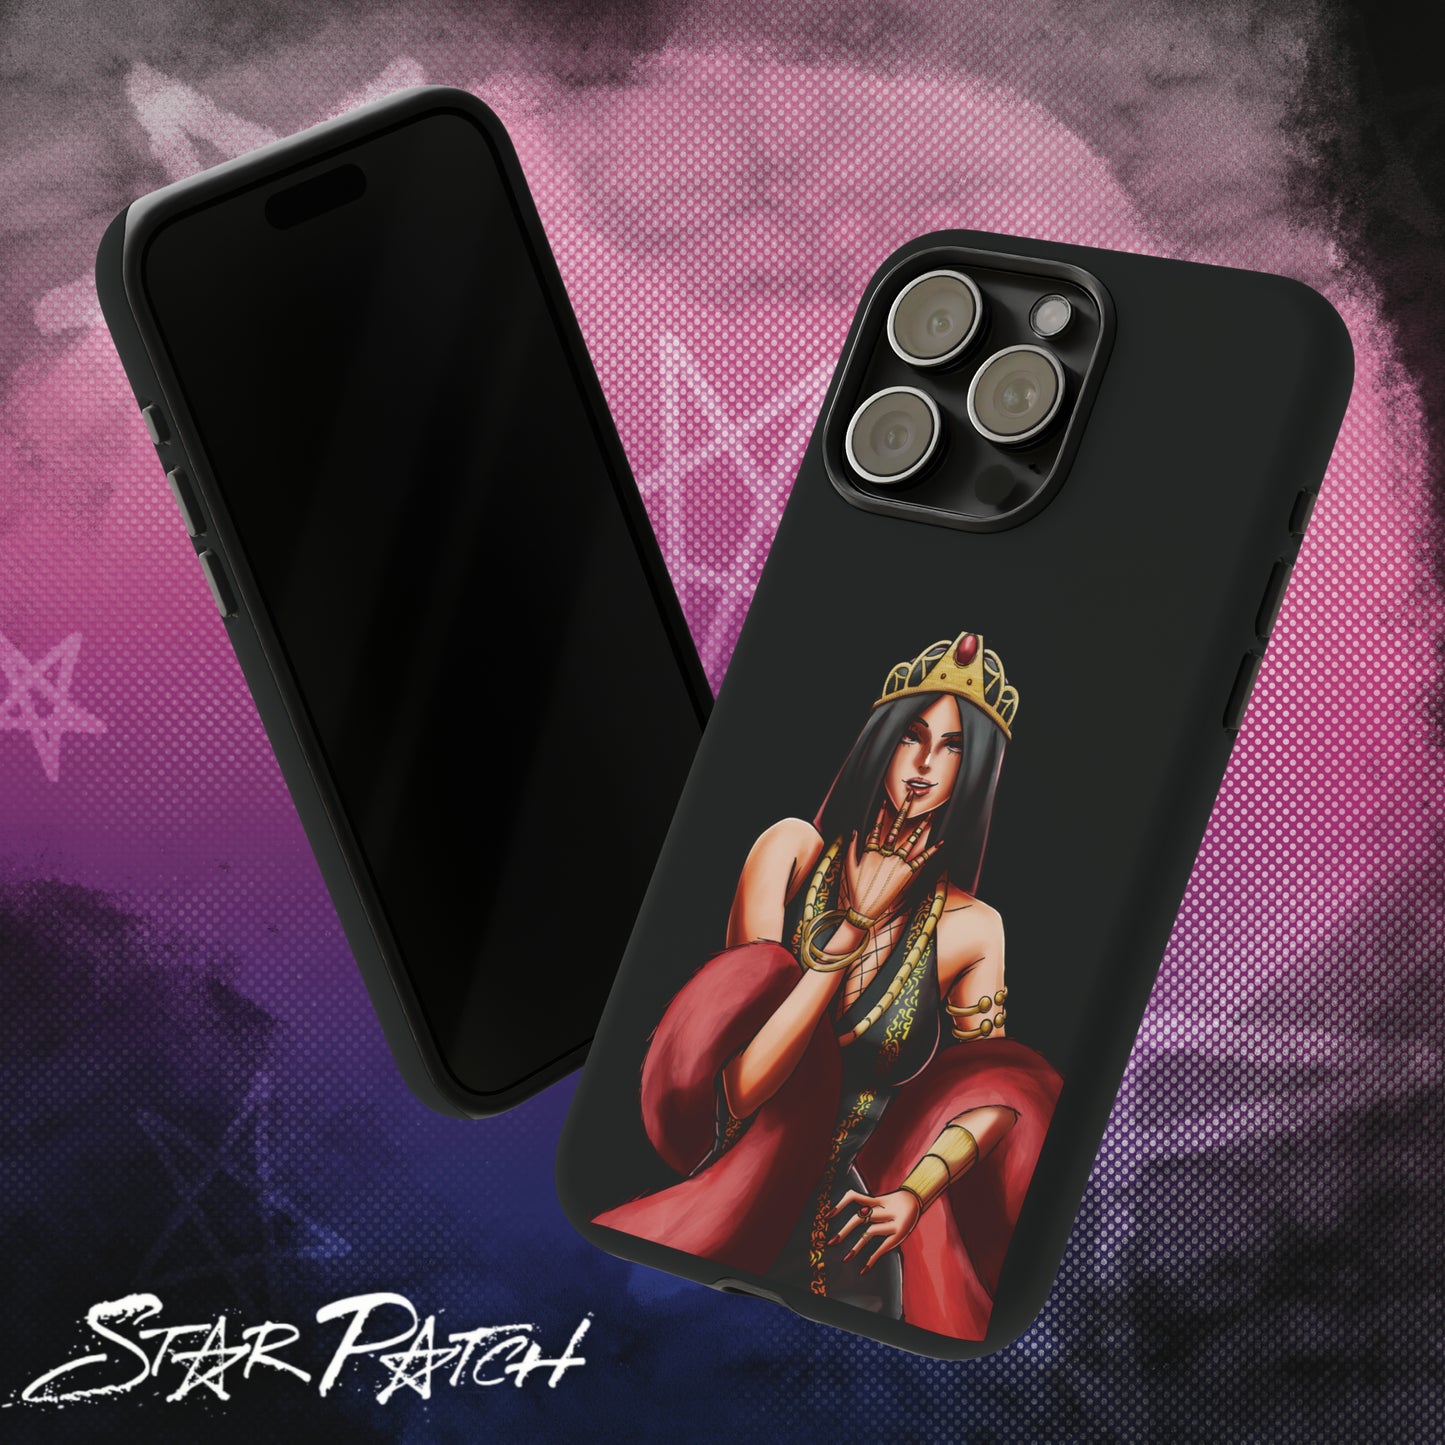 STXRPXTCH Humon Edition Volume Five- Ivelisse Phone Cases for iPhones and Samsung